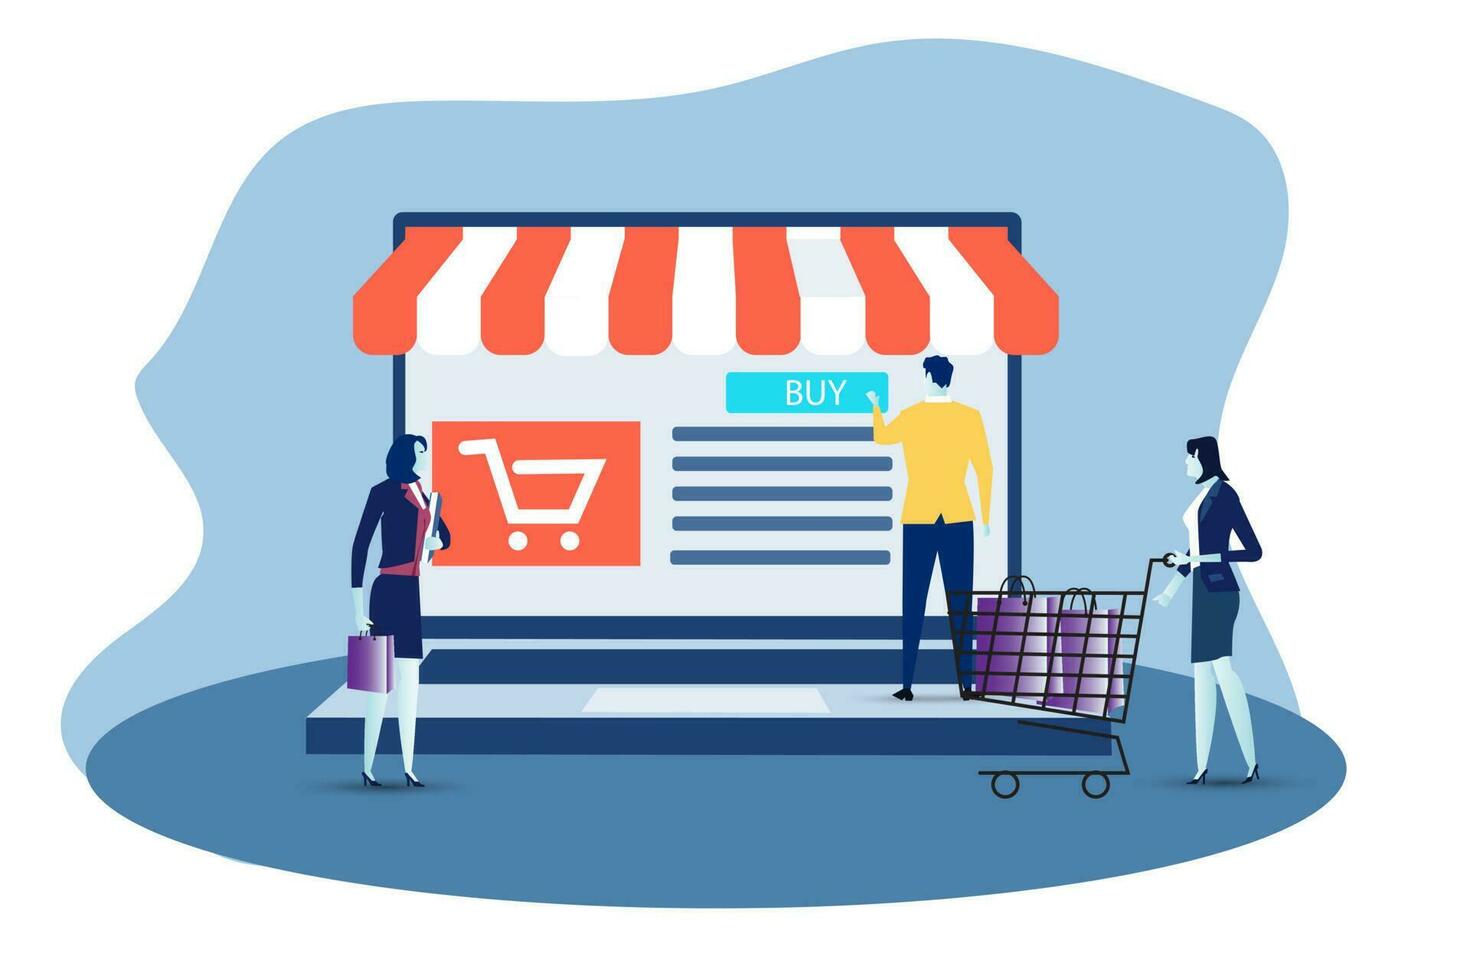 businessman and two businesswomen offer via Online store sales promotion concept discounted sales prices, decreases, shopping. vector